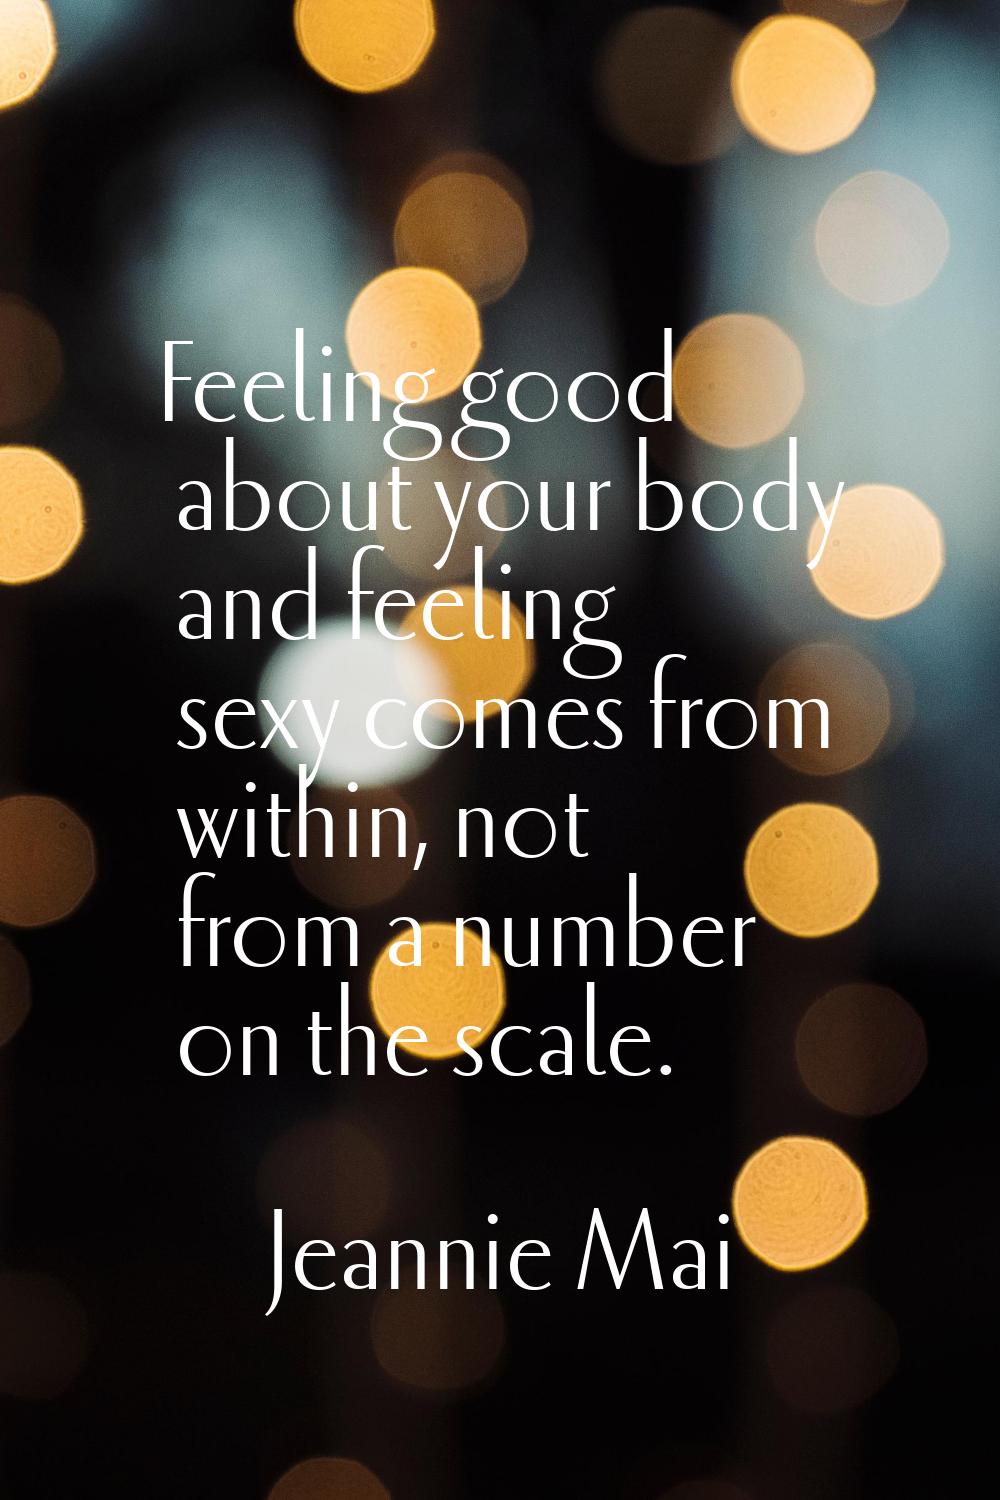 Feeling good about your body and feeling sexy comes from within, not from a number on the scale.